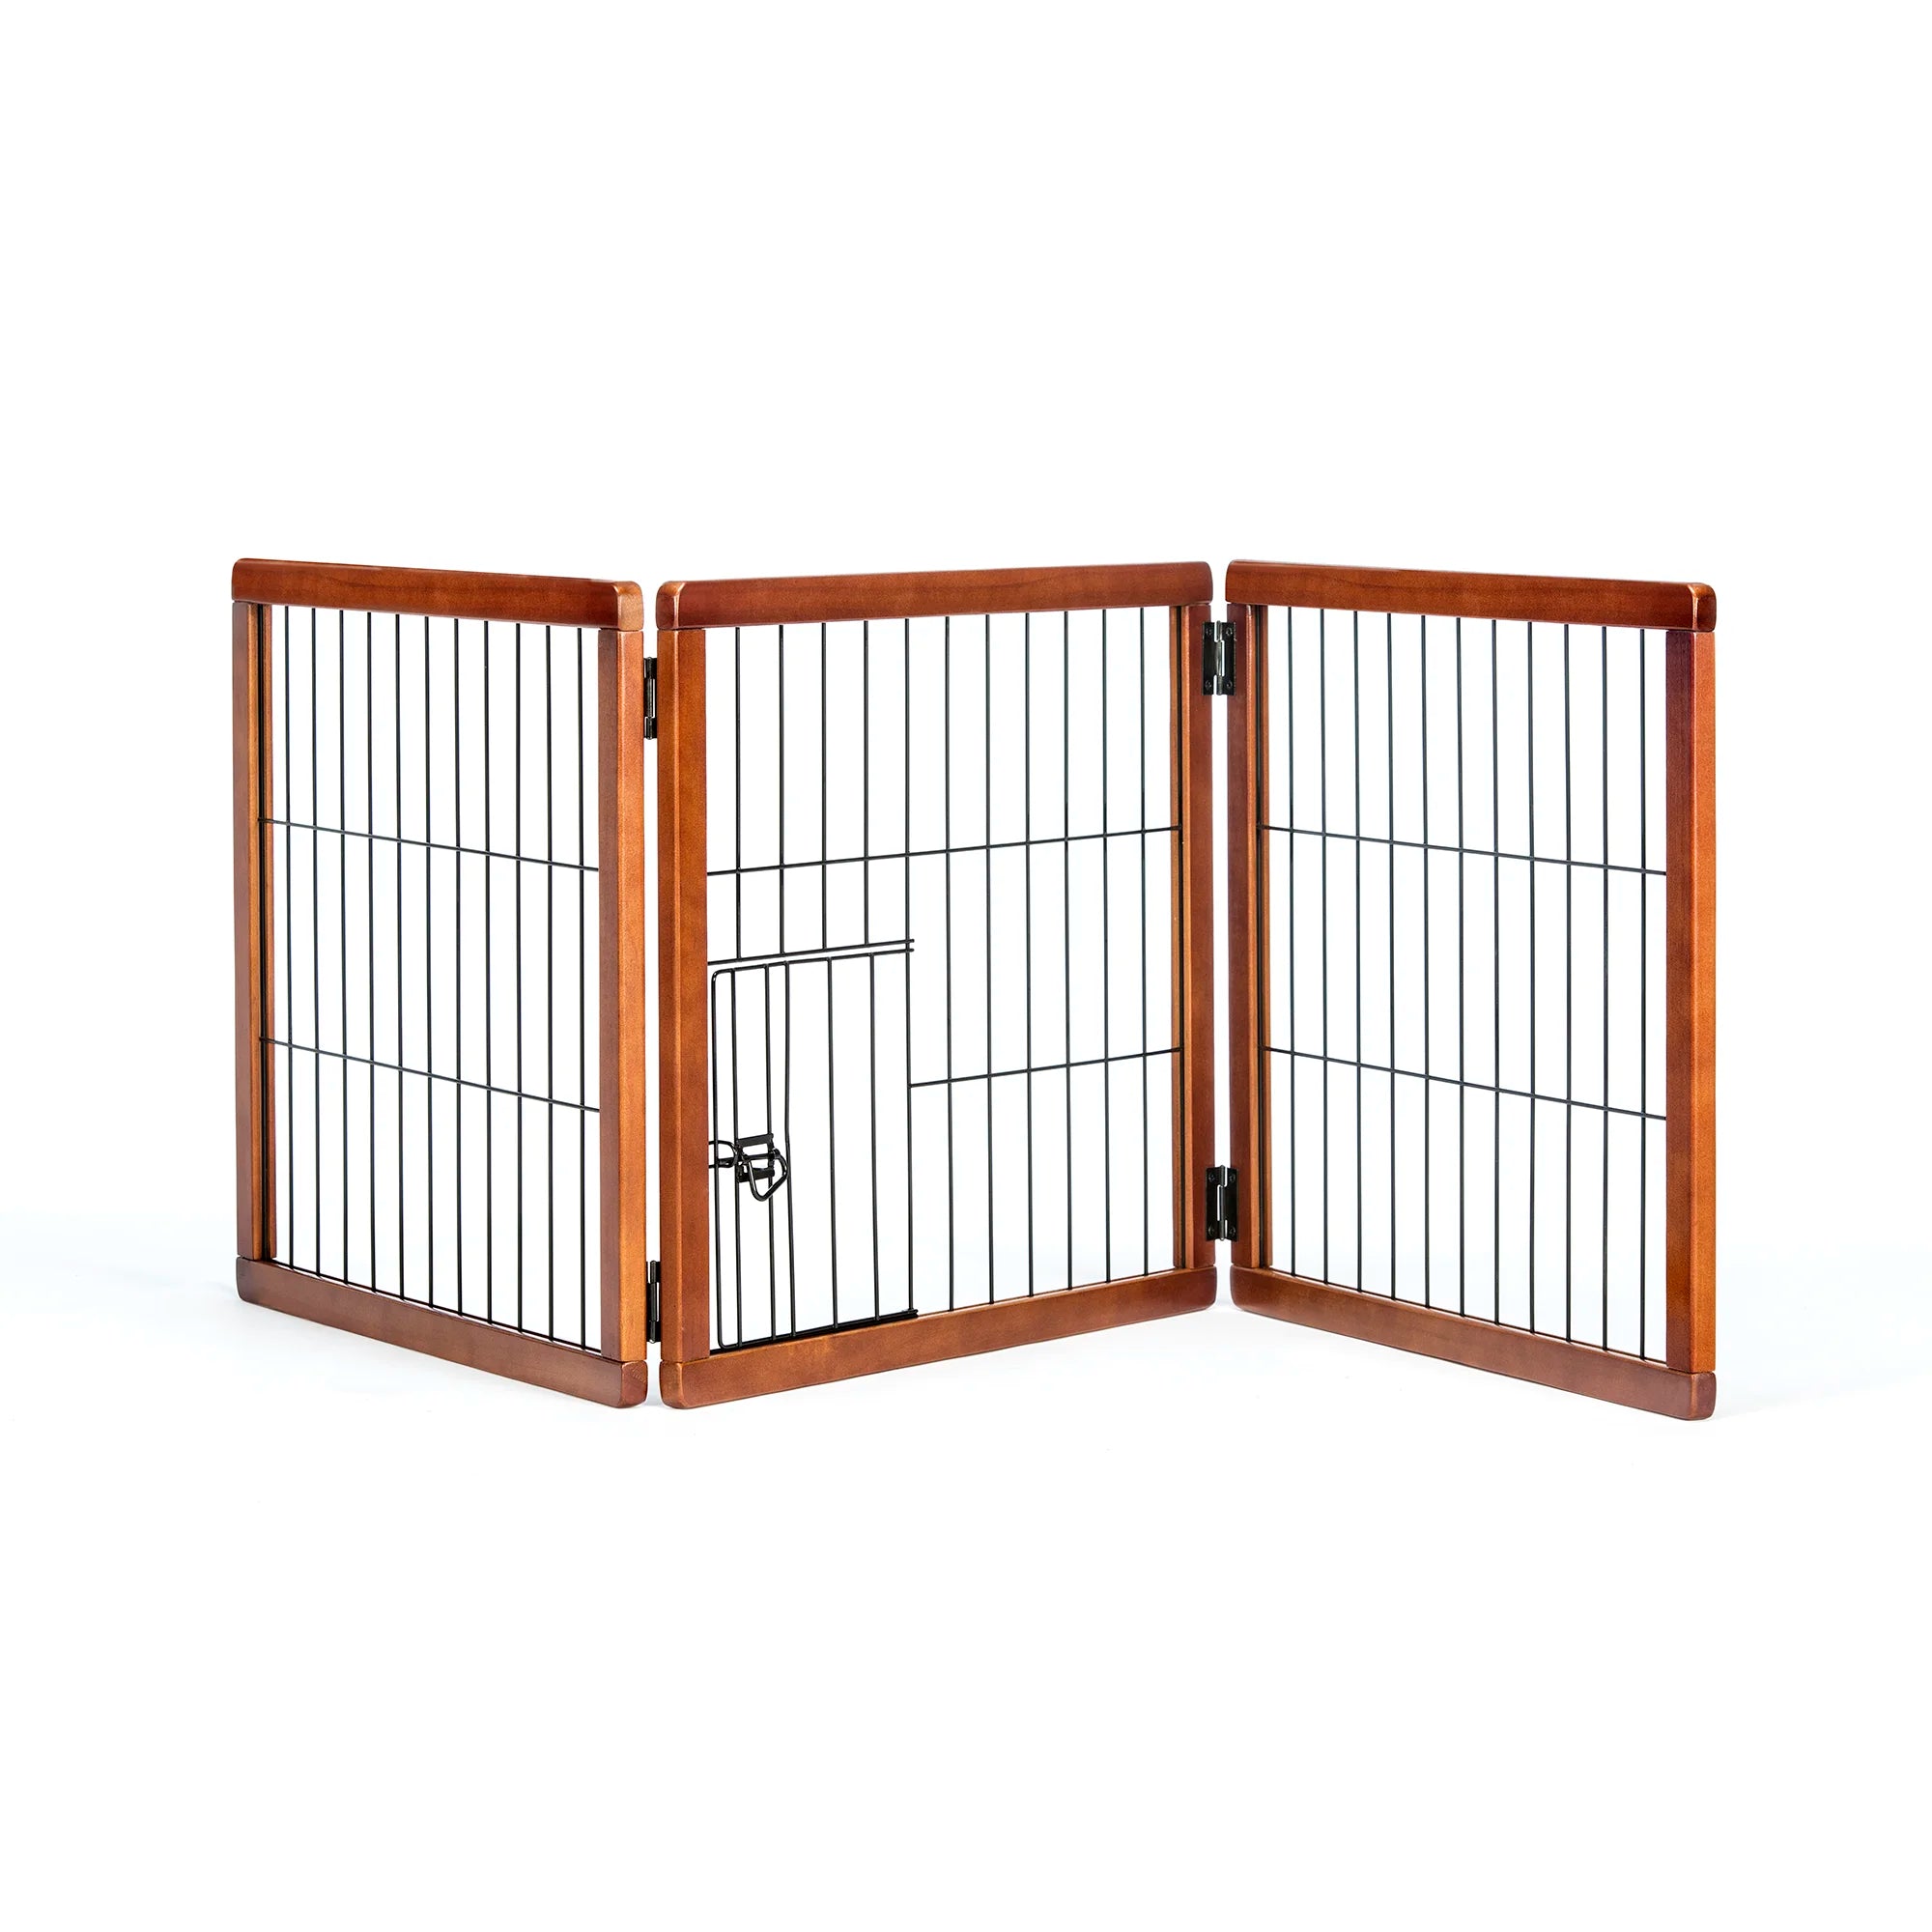 Design Paw 3 Panel Wooden Pet Gate on white background.